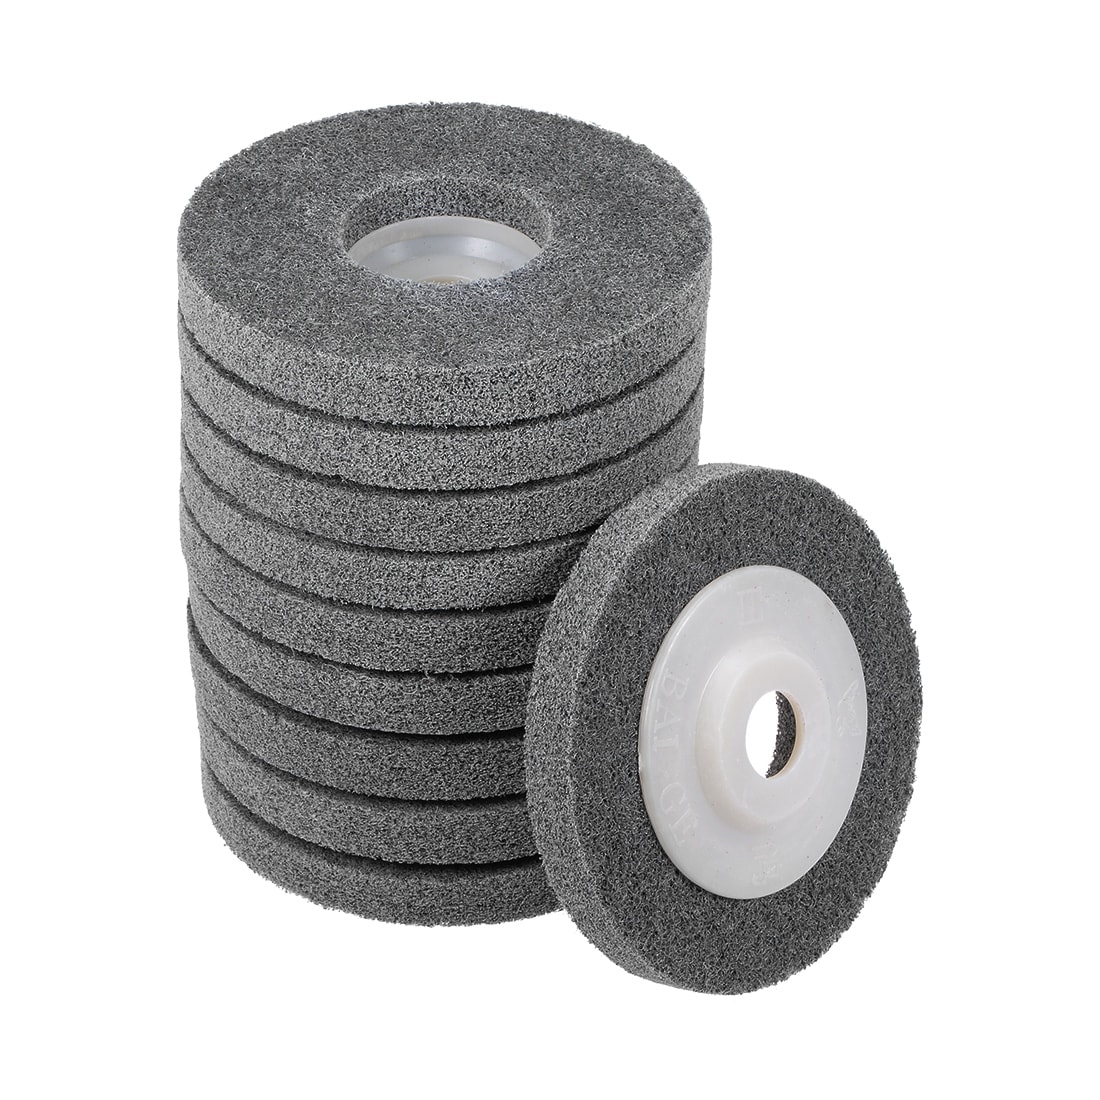 https://ak1.ostkcdn.com/images/products/is/images/direct/834083fec2a5a59170581b4a868f00520021ea7e/4-Inch-Nylon-Fiber-Polishing-Wheel-Sanding-Buffing-Disc-for-Angle-Grinder-10-Pcs.jpg